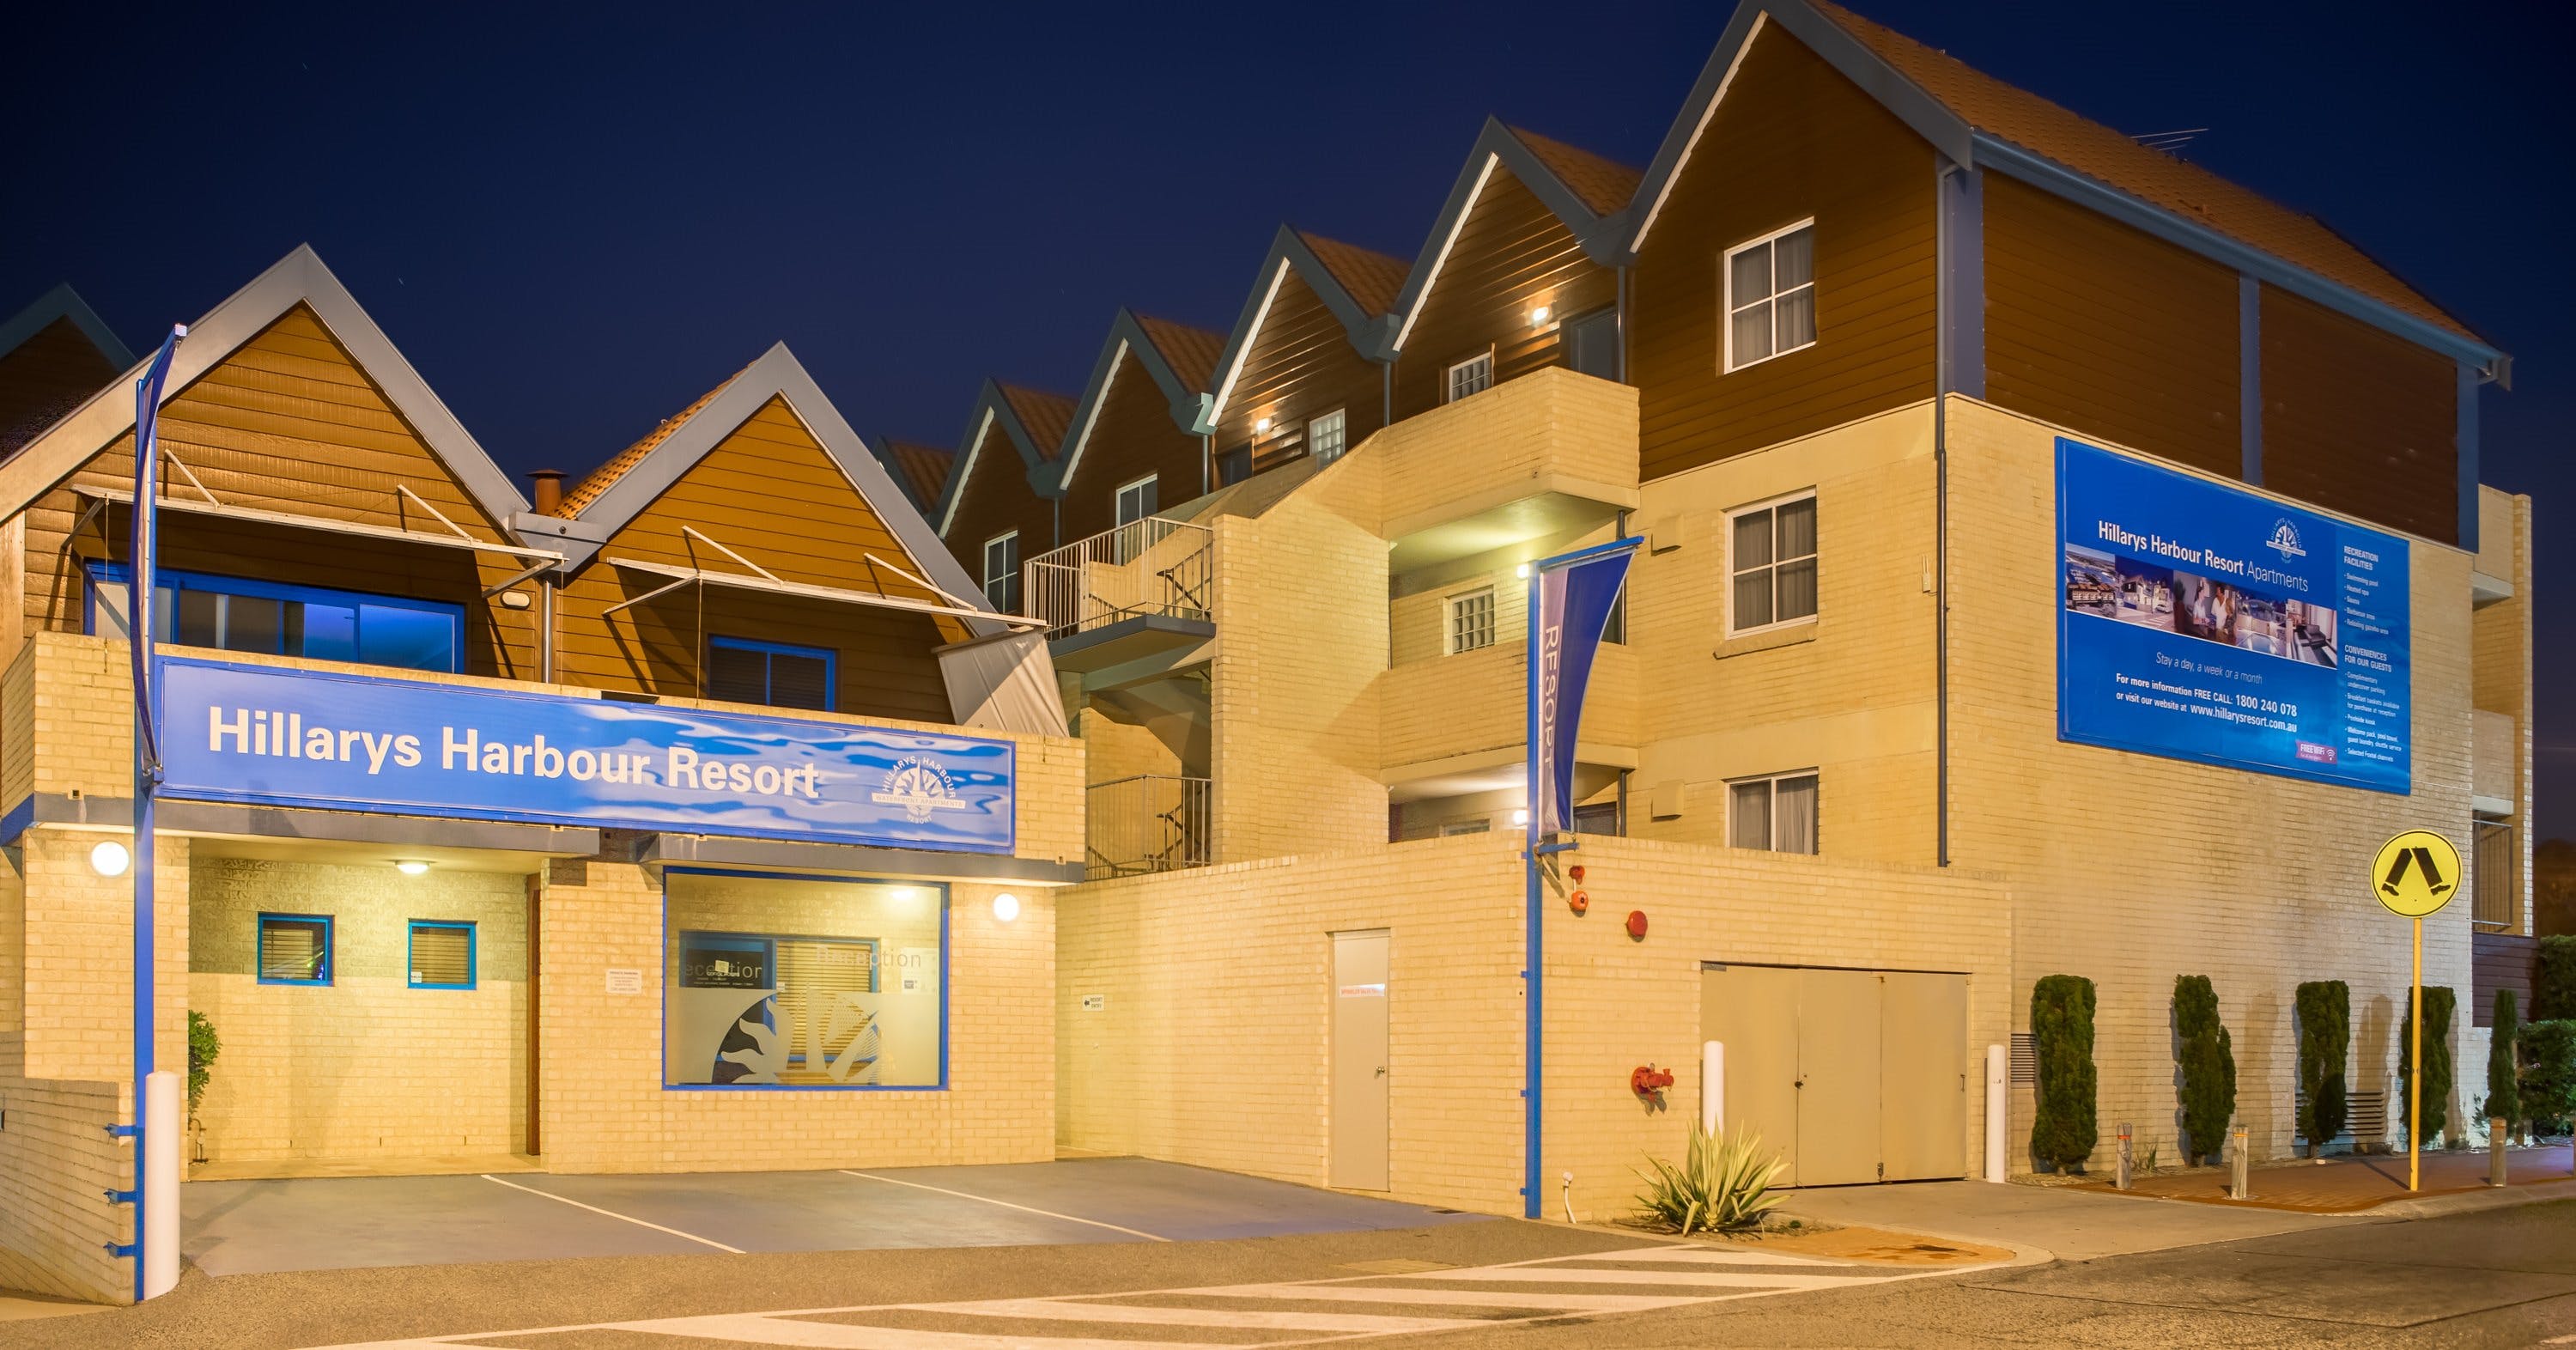 Hillarys Harbour Resort - Accommodation in Surfers Paradise